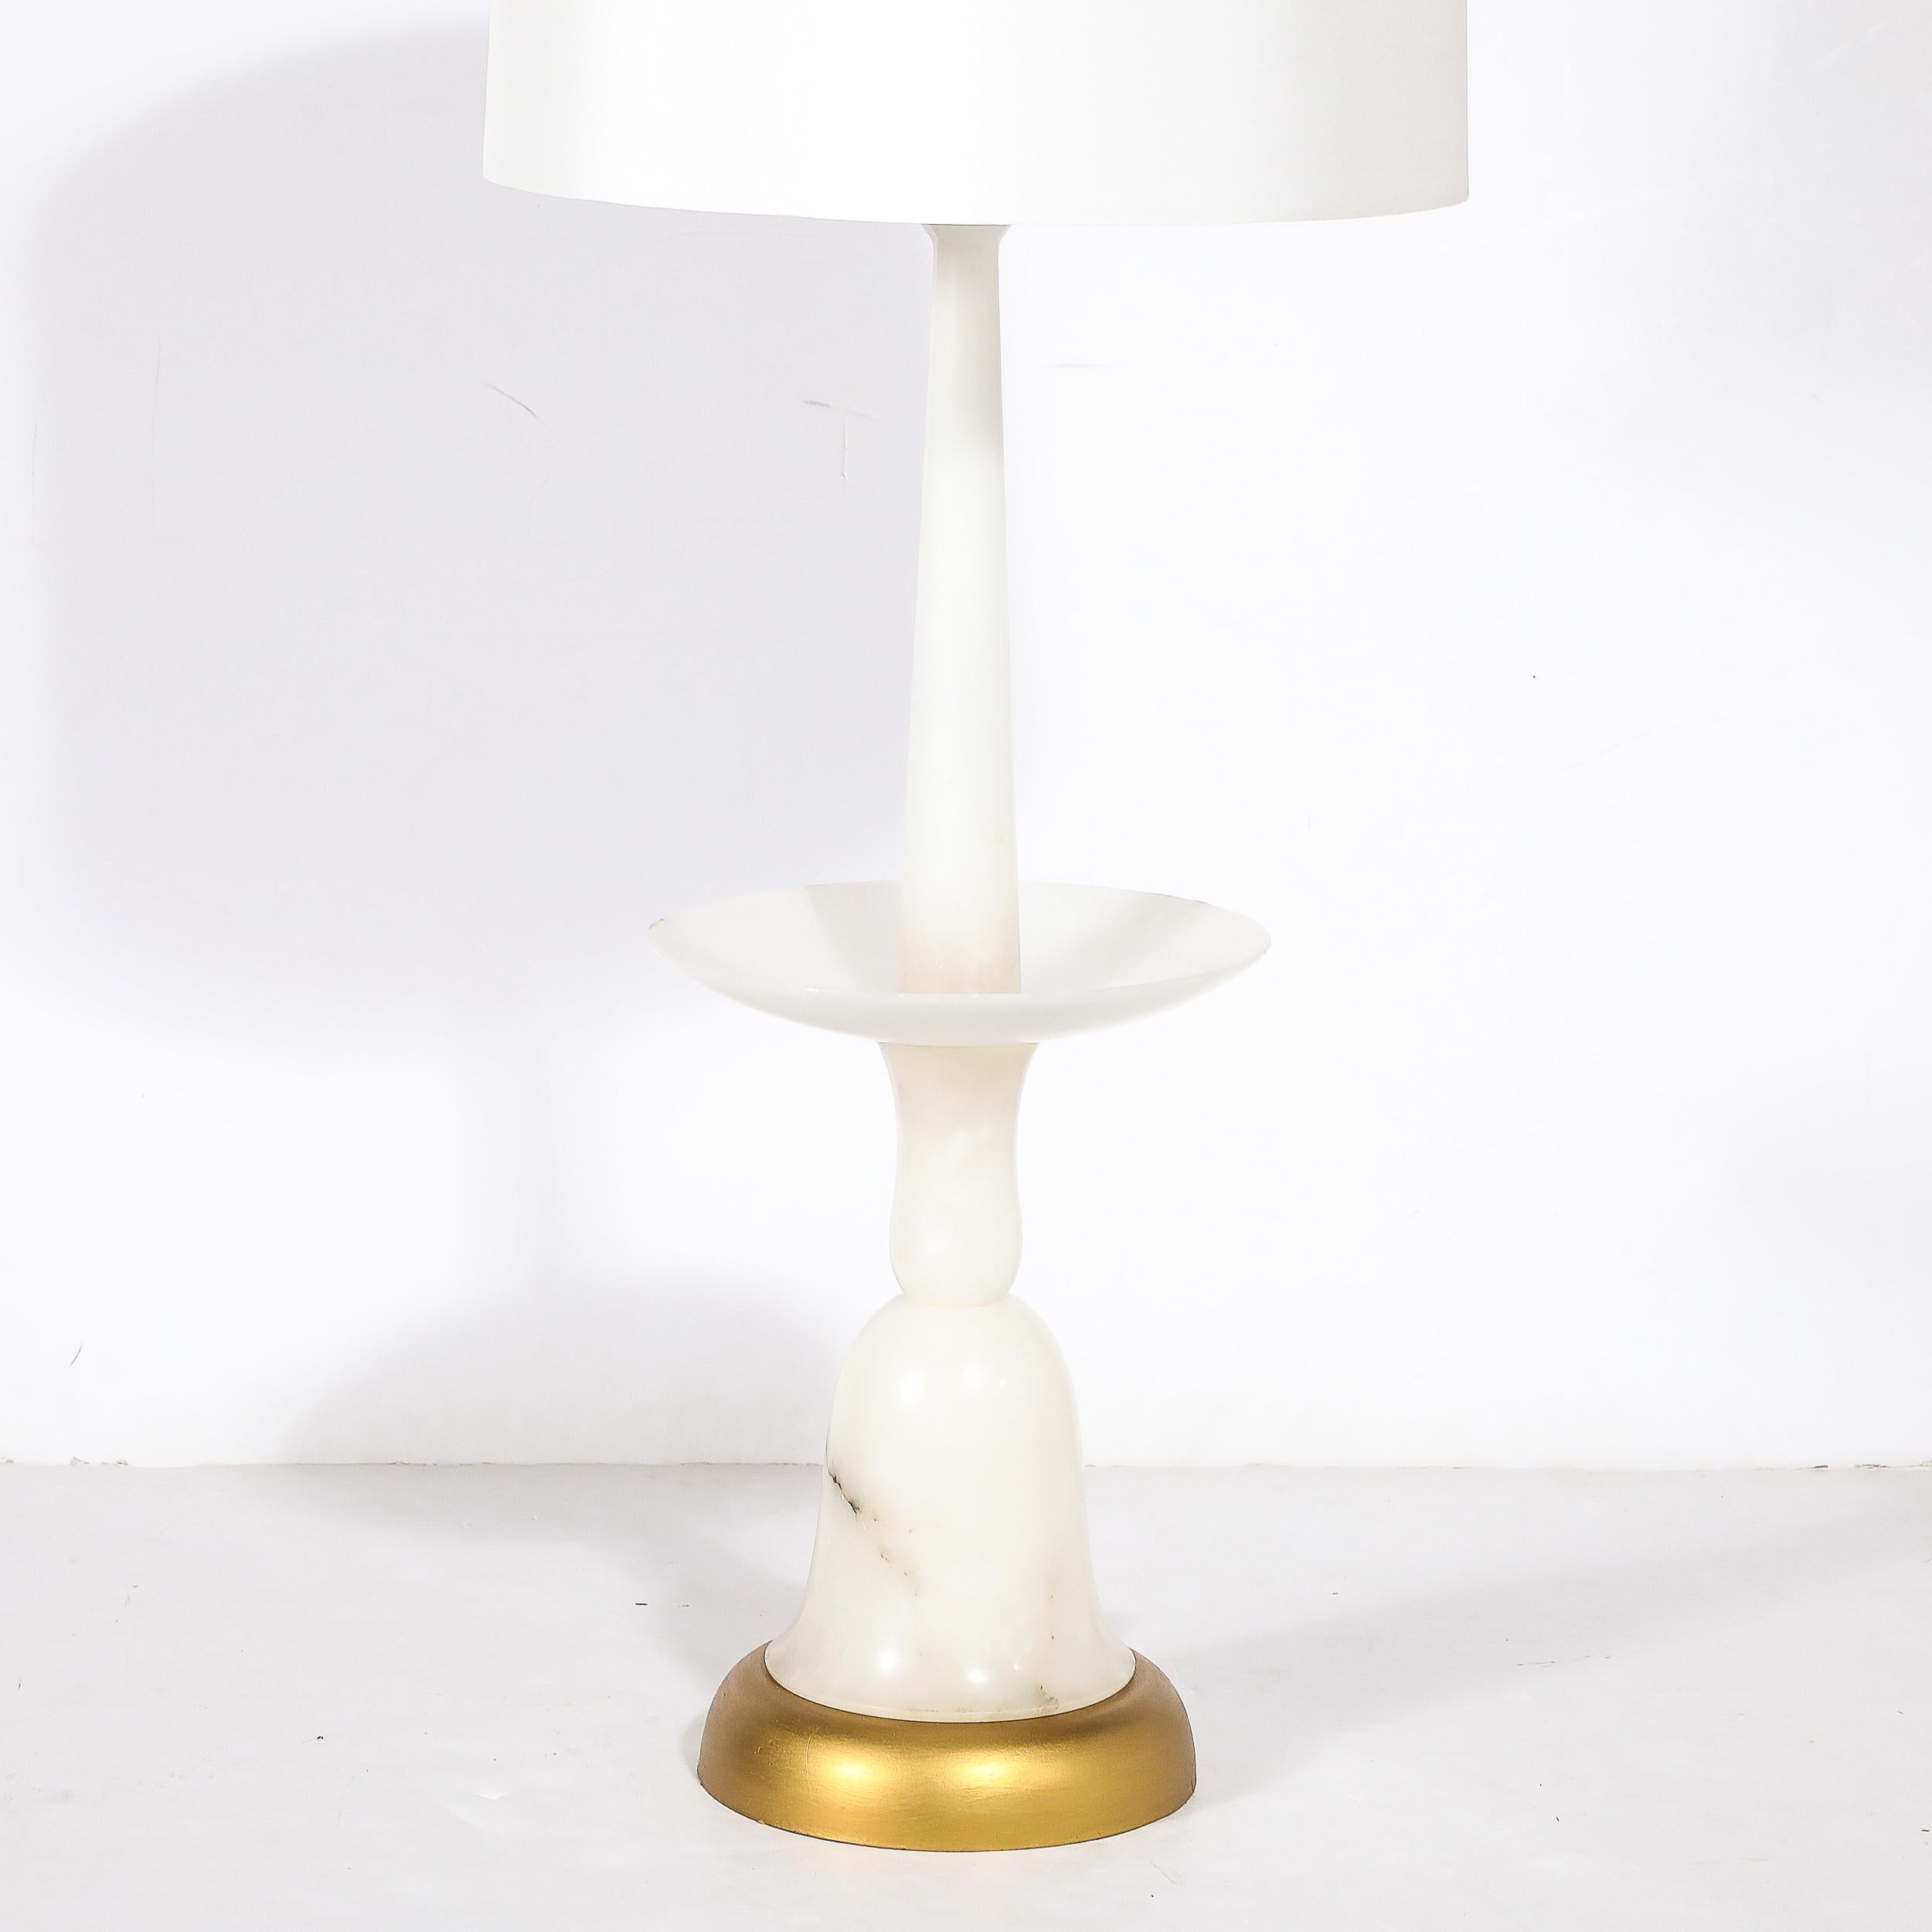 This unique and well proportioned Mid-Century Modernist Sculptural Balustrade Form Table Lamp in Carrera Marble W/ Gilt Base originates from Italy, Circa 1960. Features a lovely silhouette of elegantly curved lines and detailing composed of stacked